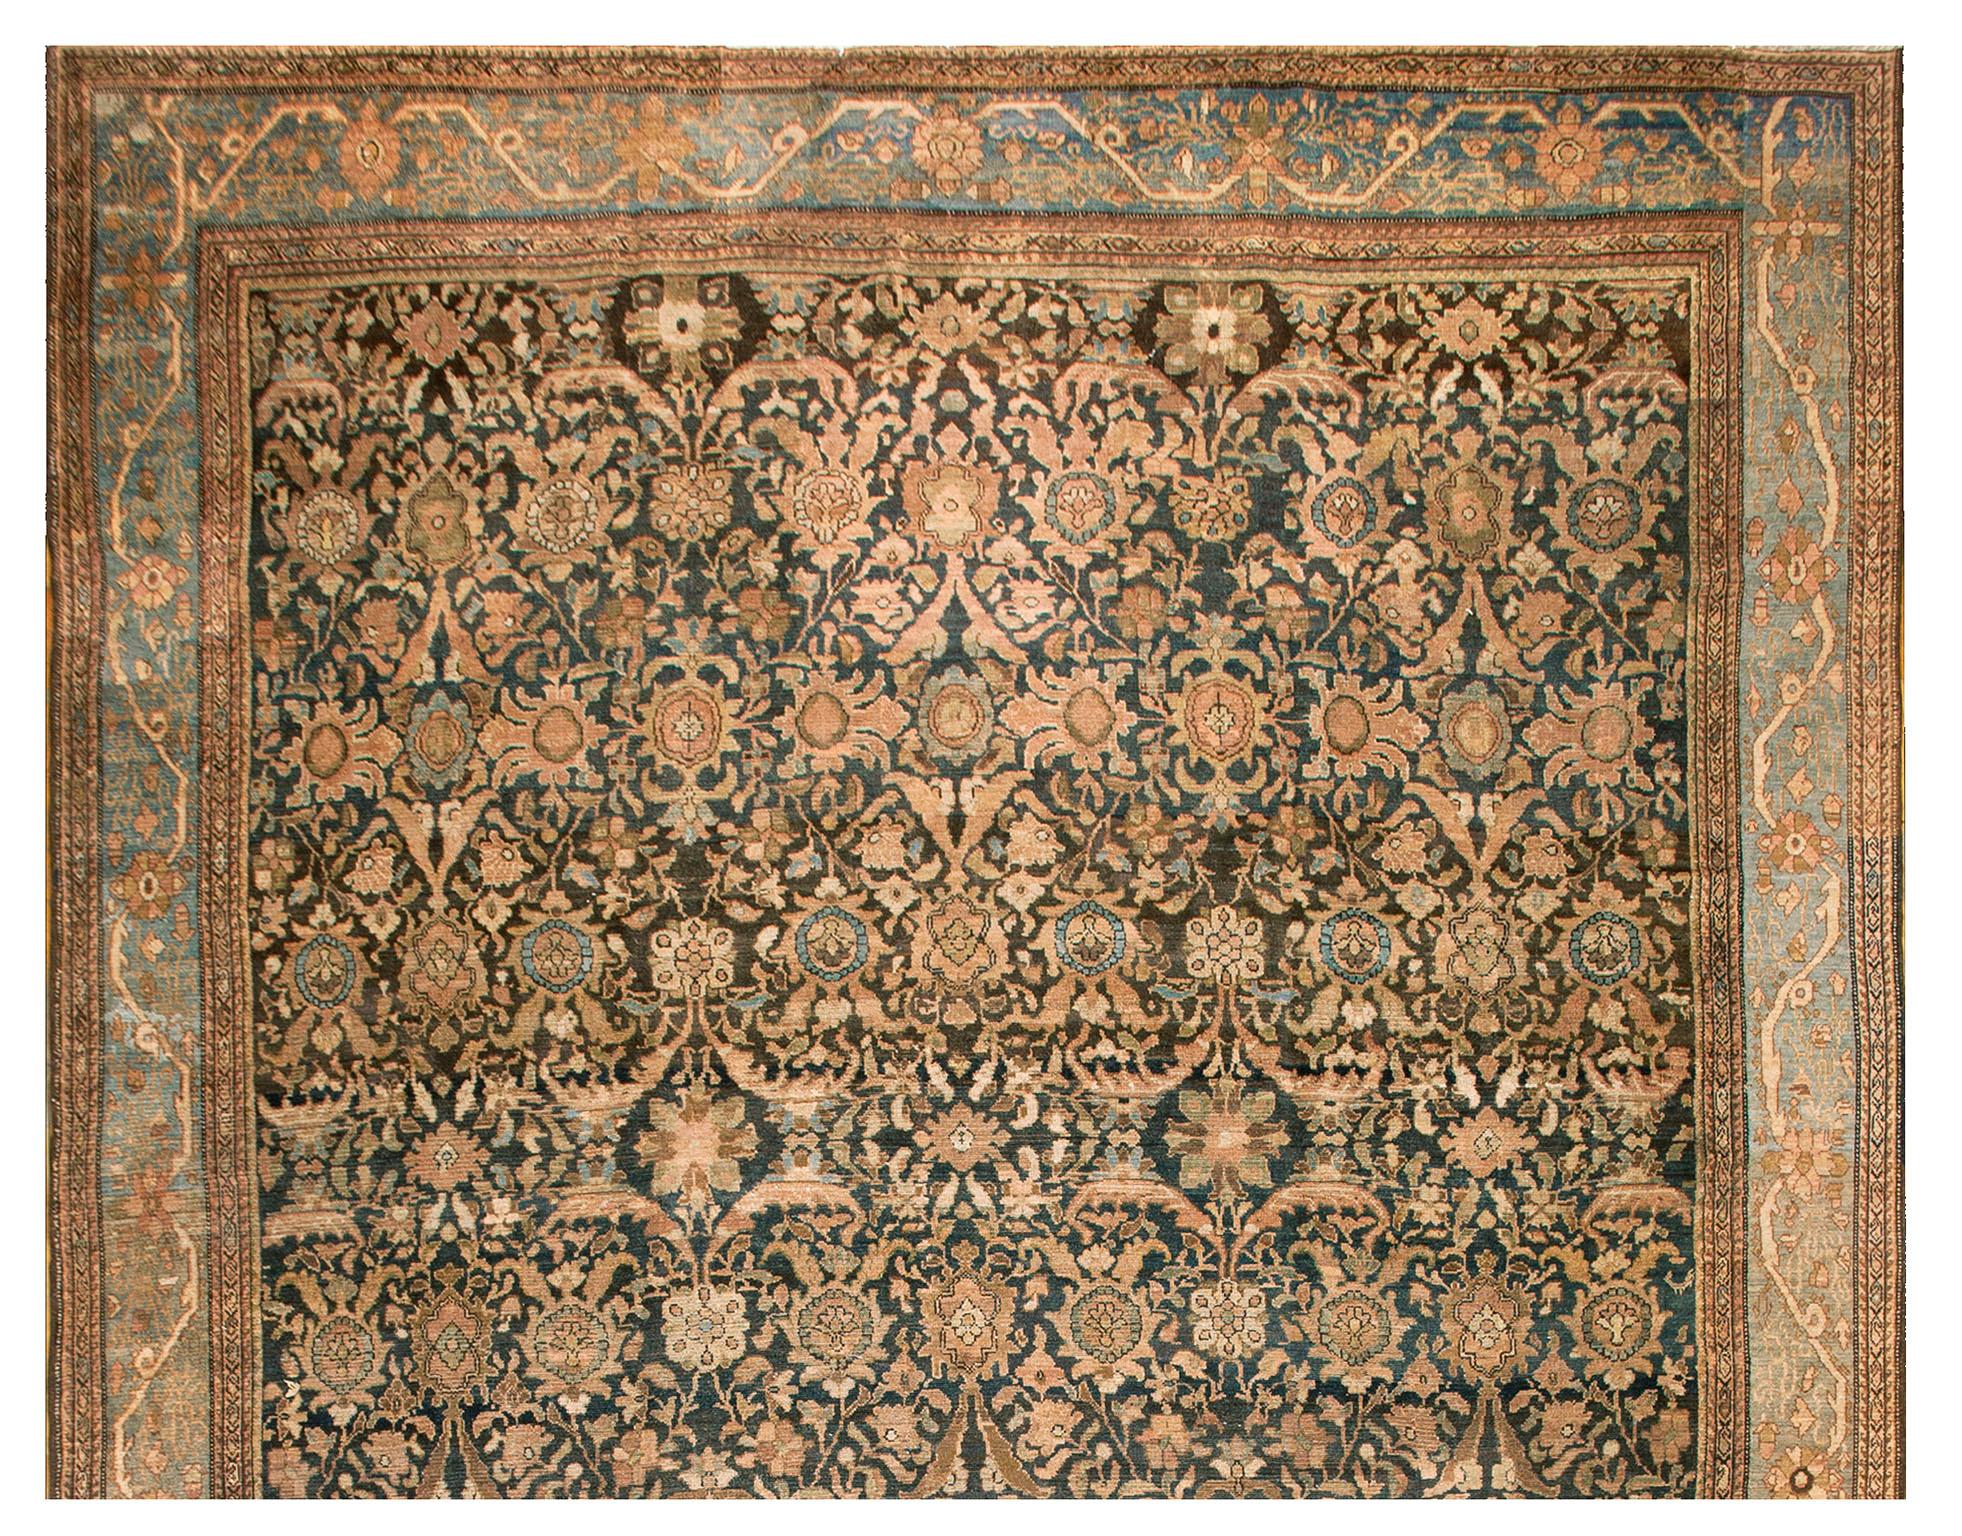 Hand-Knotted Late 19th Century Persian Malayer Carpet ( 11' 10